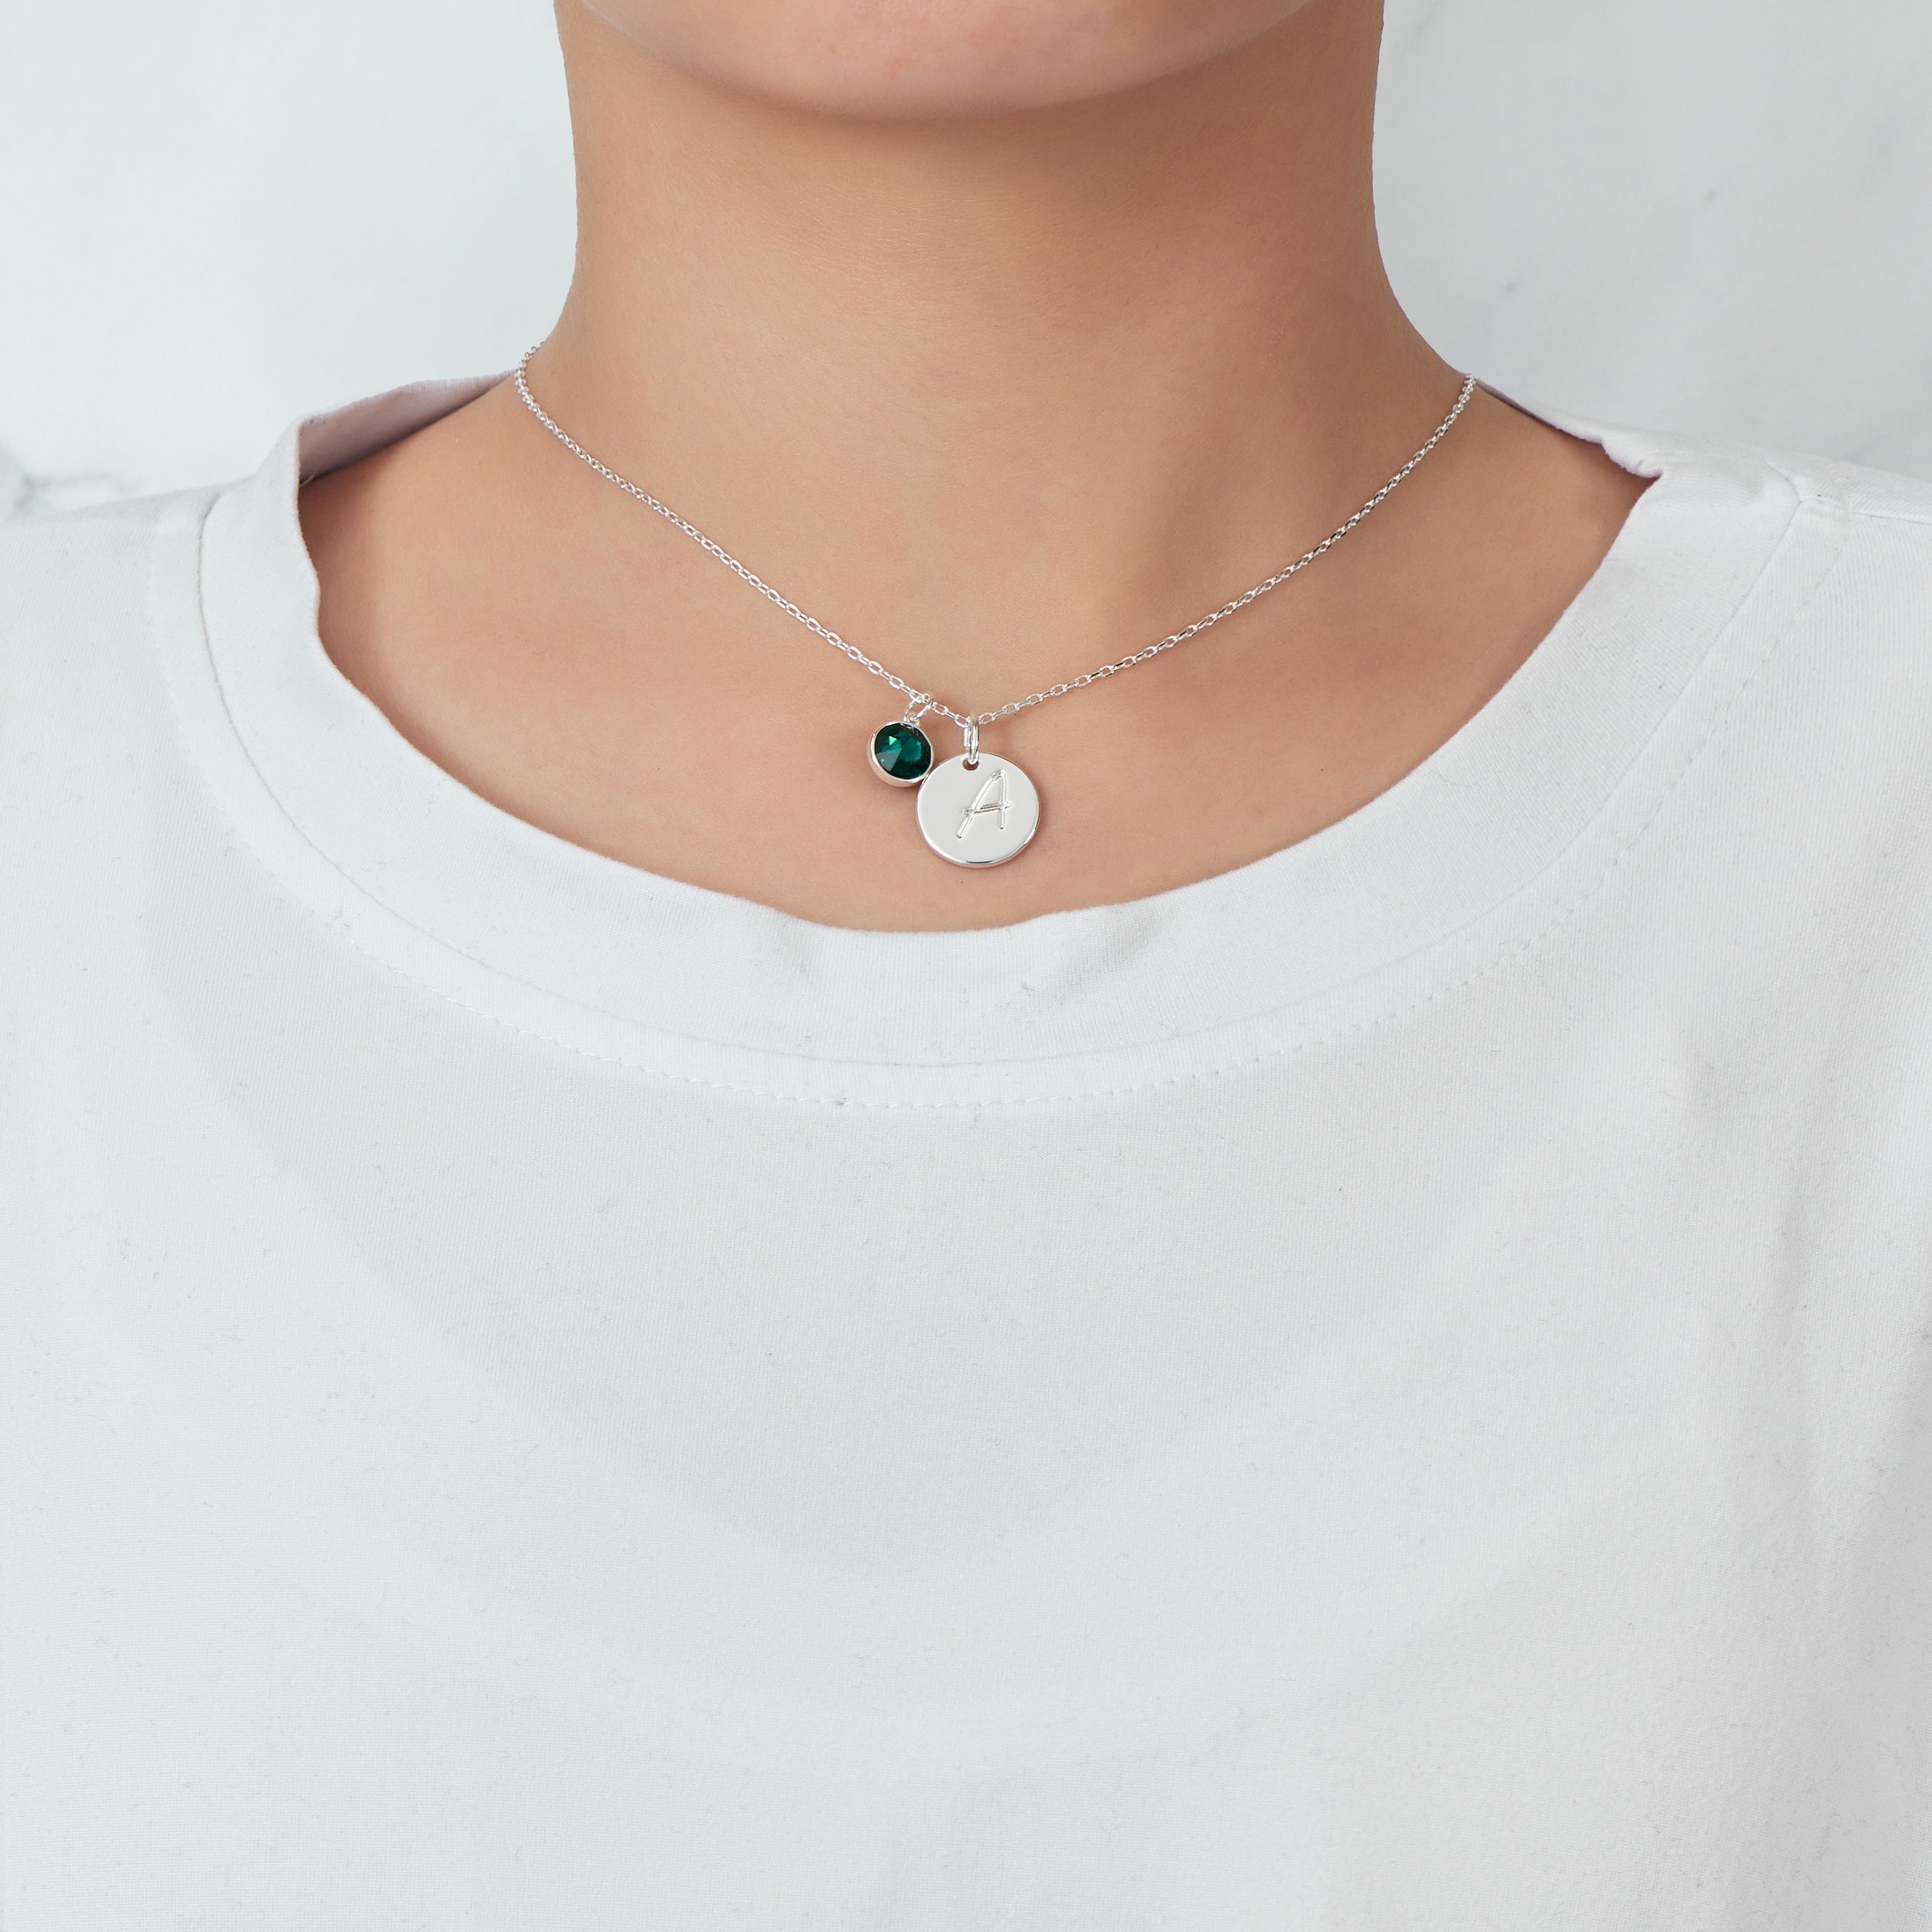 May (Emerald) Birthstone Necklace with Initial Charm (A to Z) Created with Zircondia® Crystals